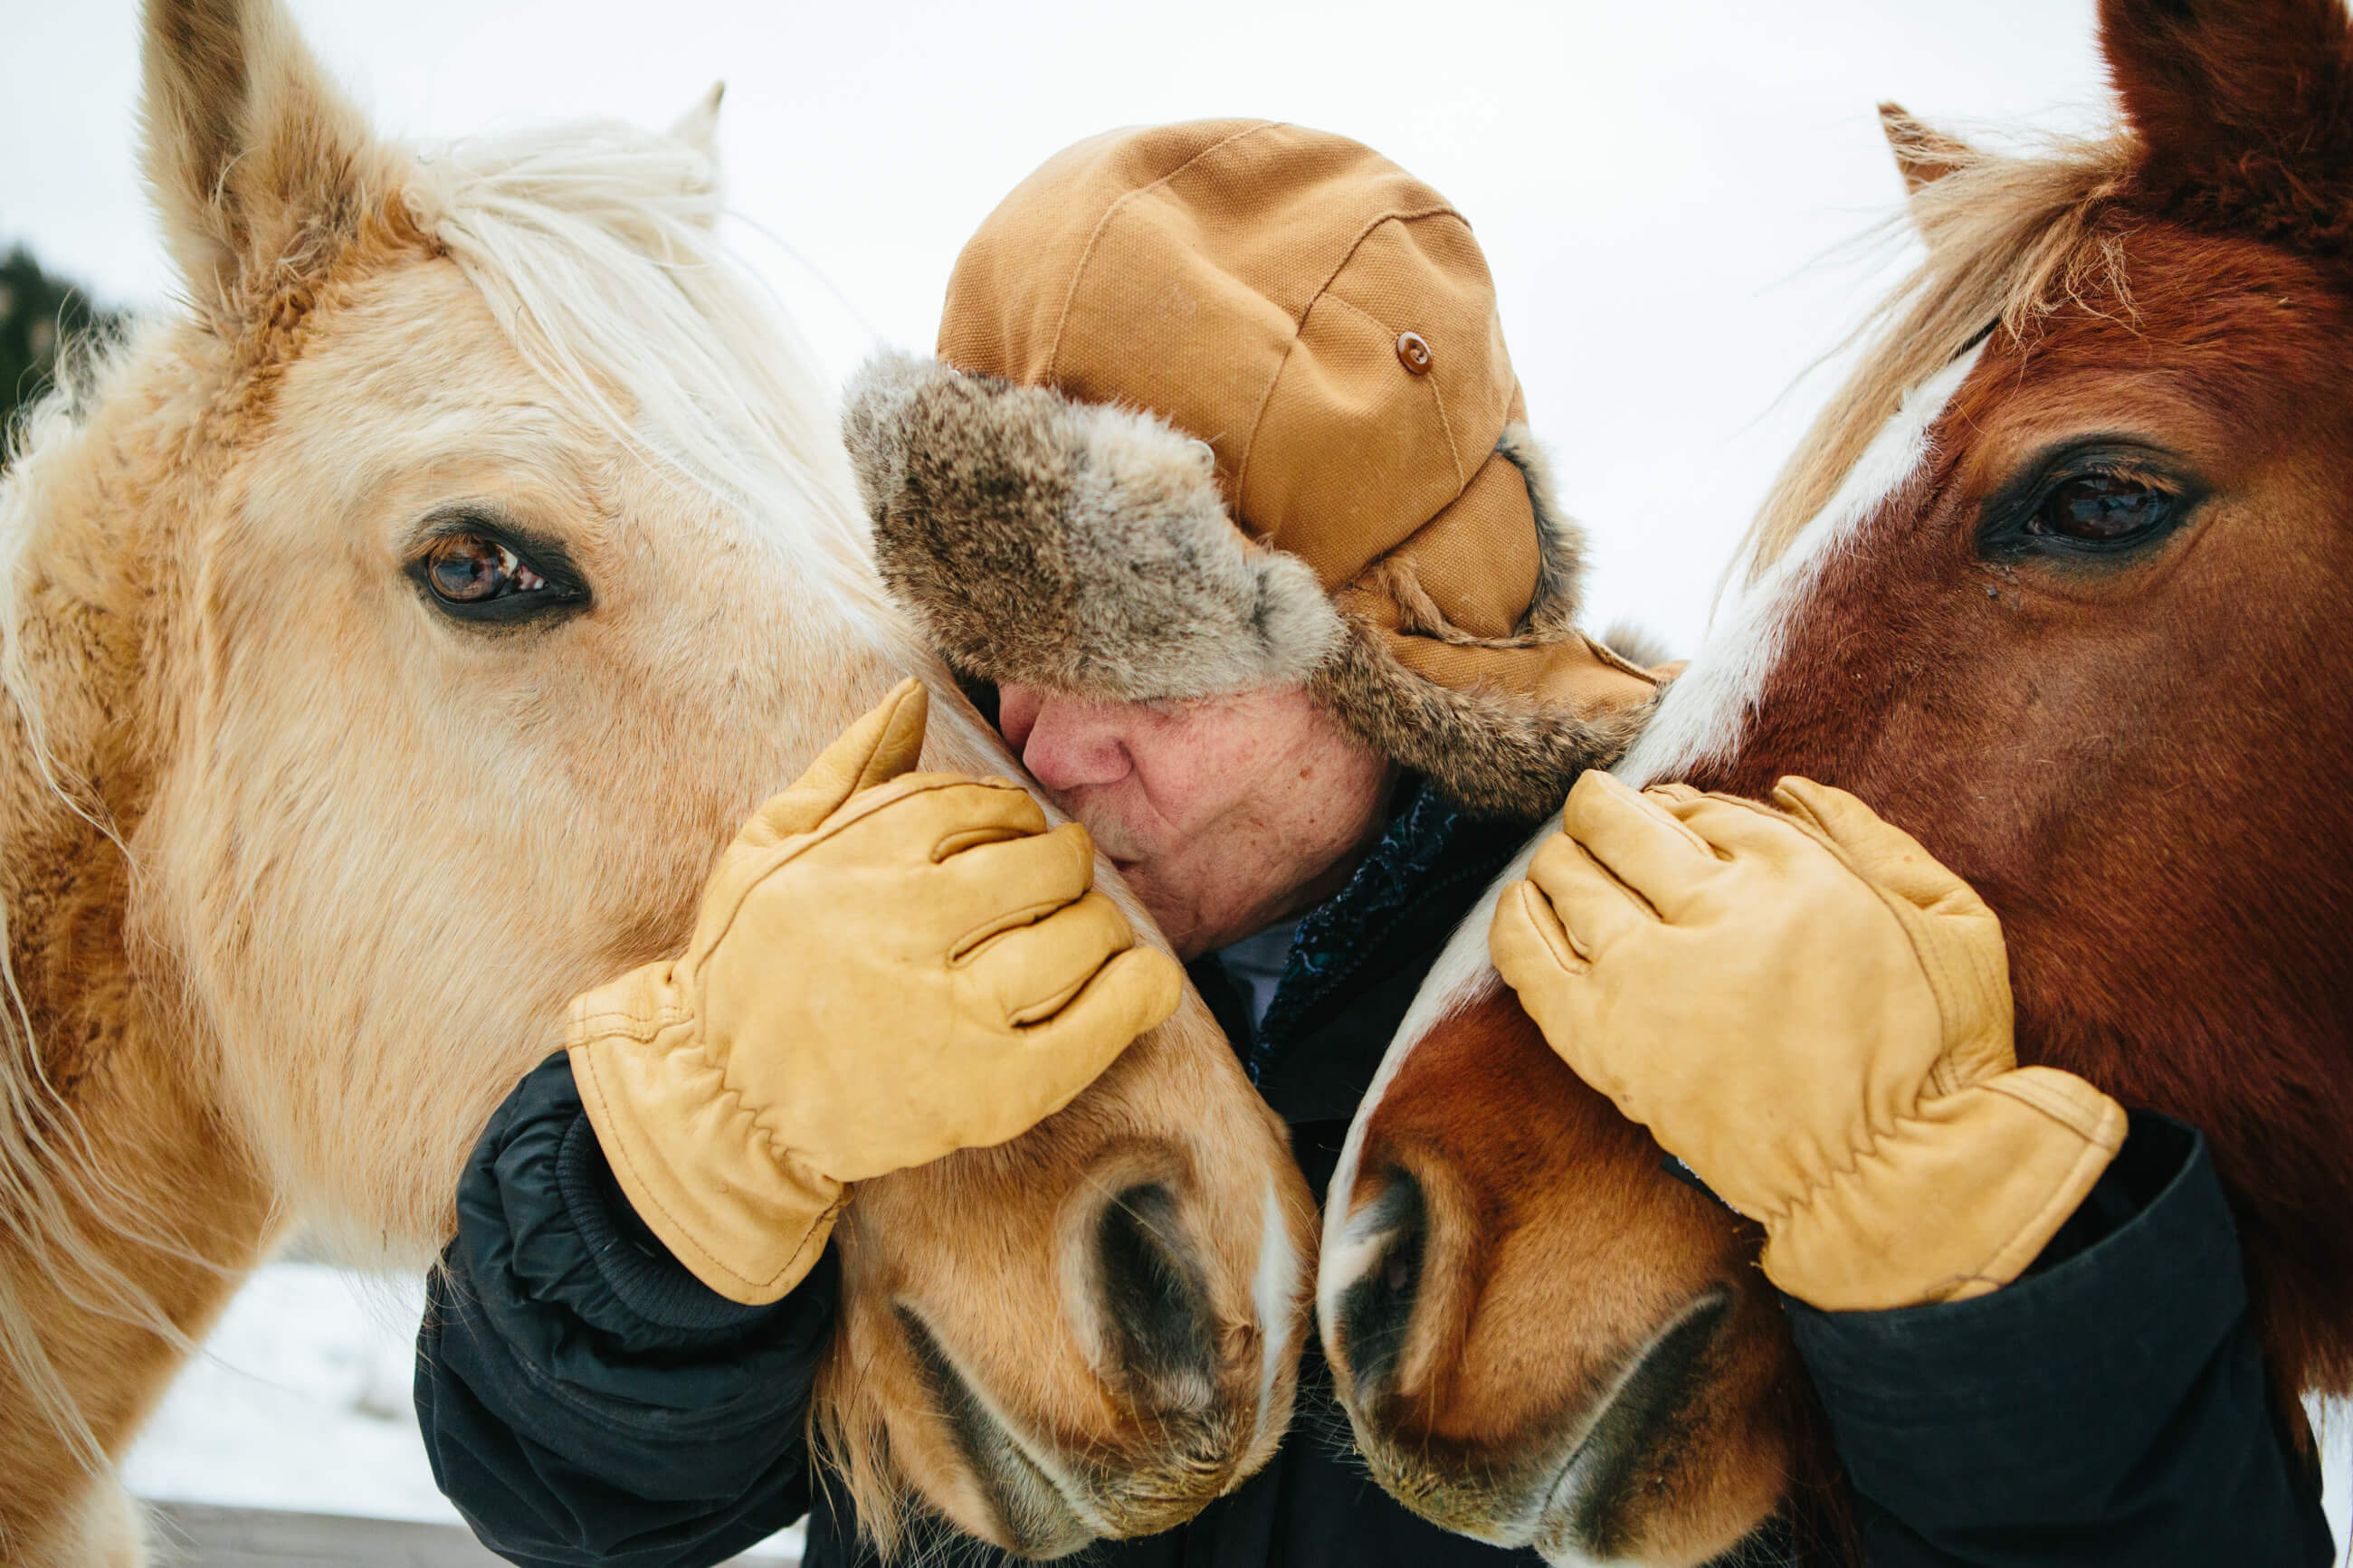 James Lee Burke kisses the nose of one of his horses at his home in Montana in February